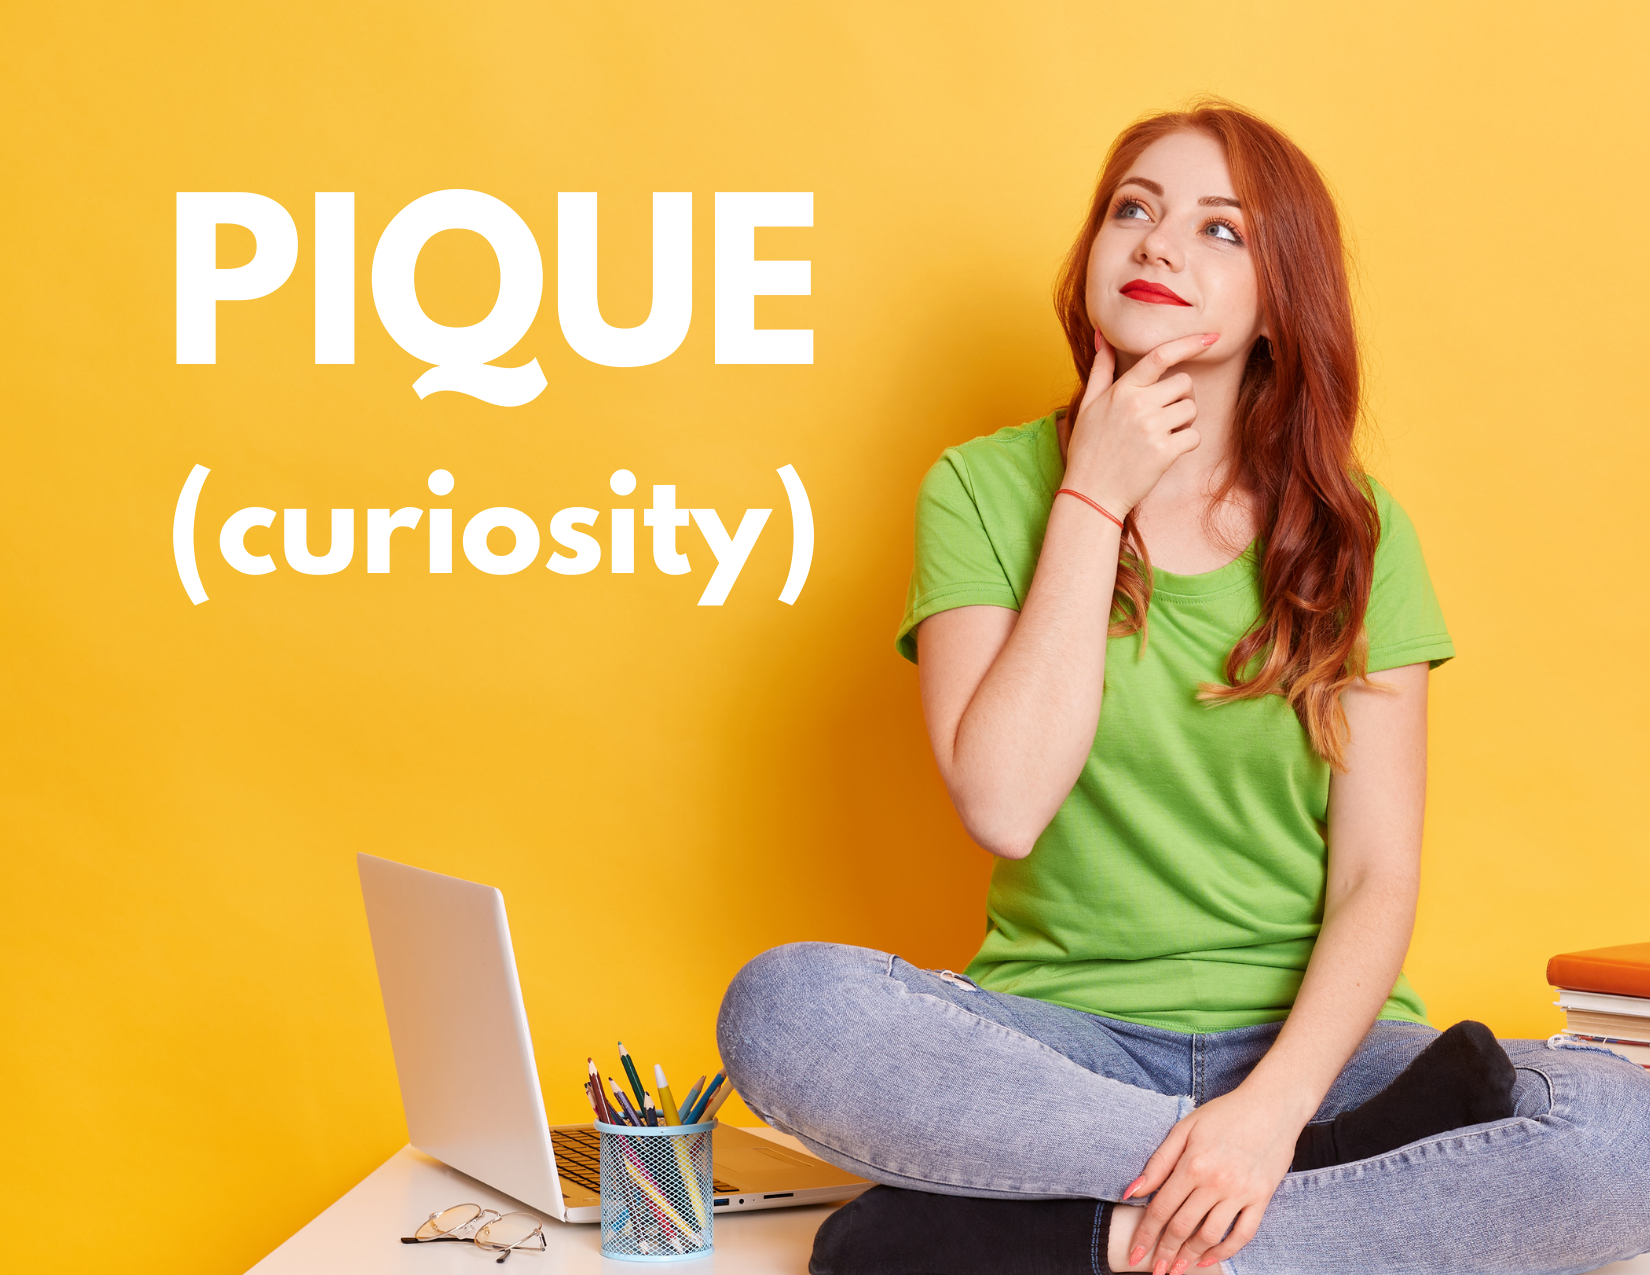 A picture of a woman sitting on a table pondering a question with the caption "pique curiosity"